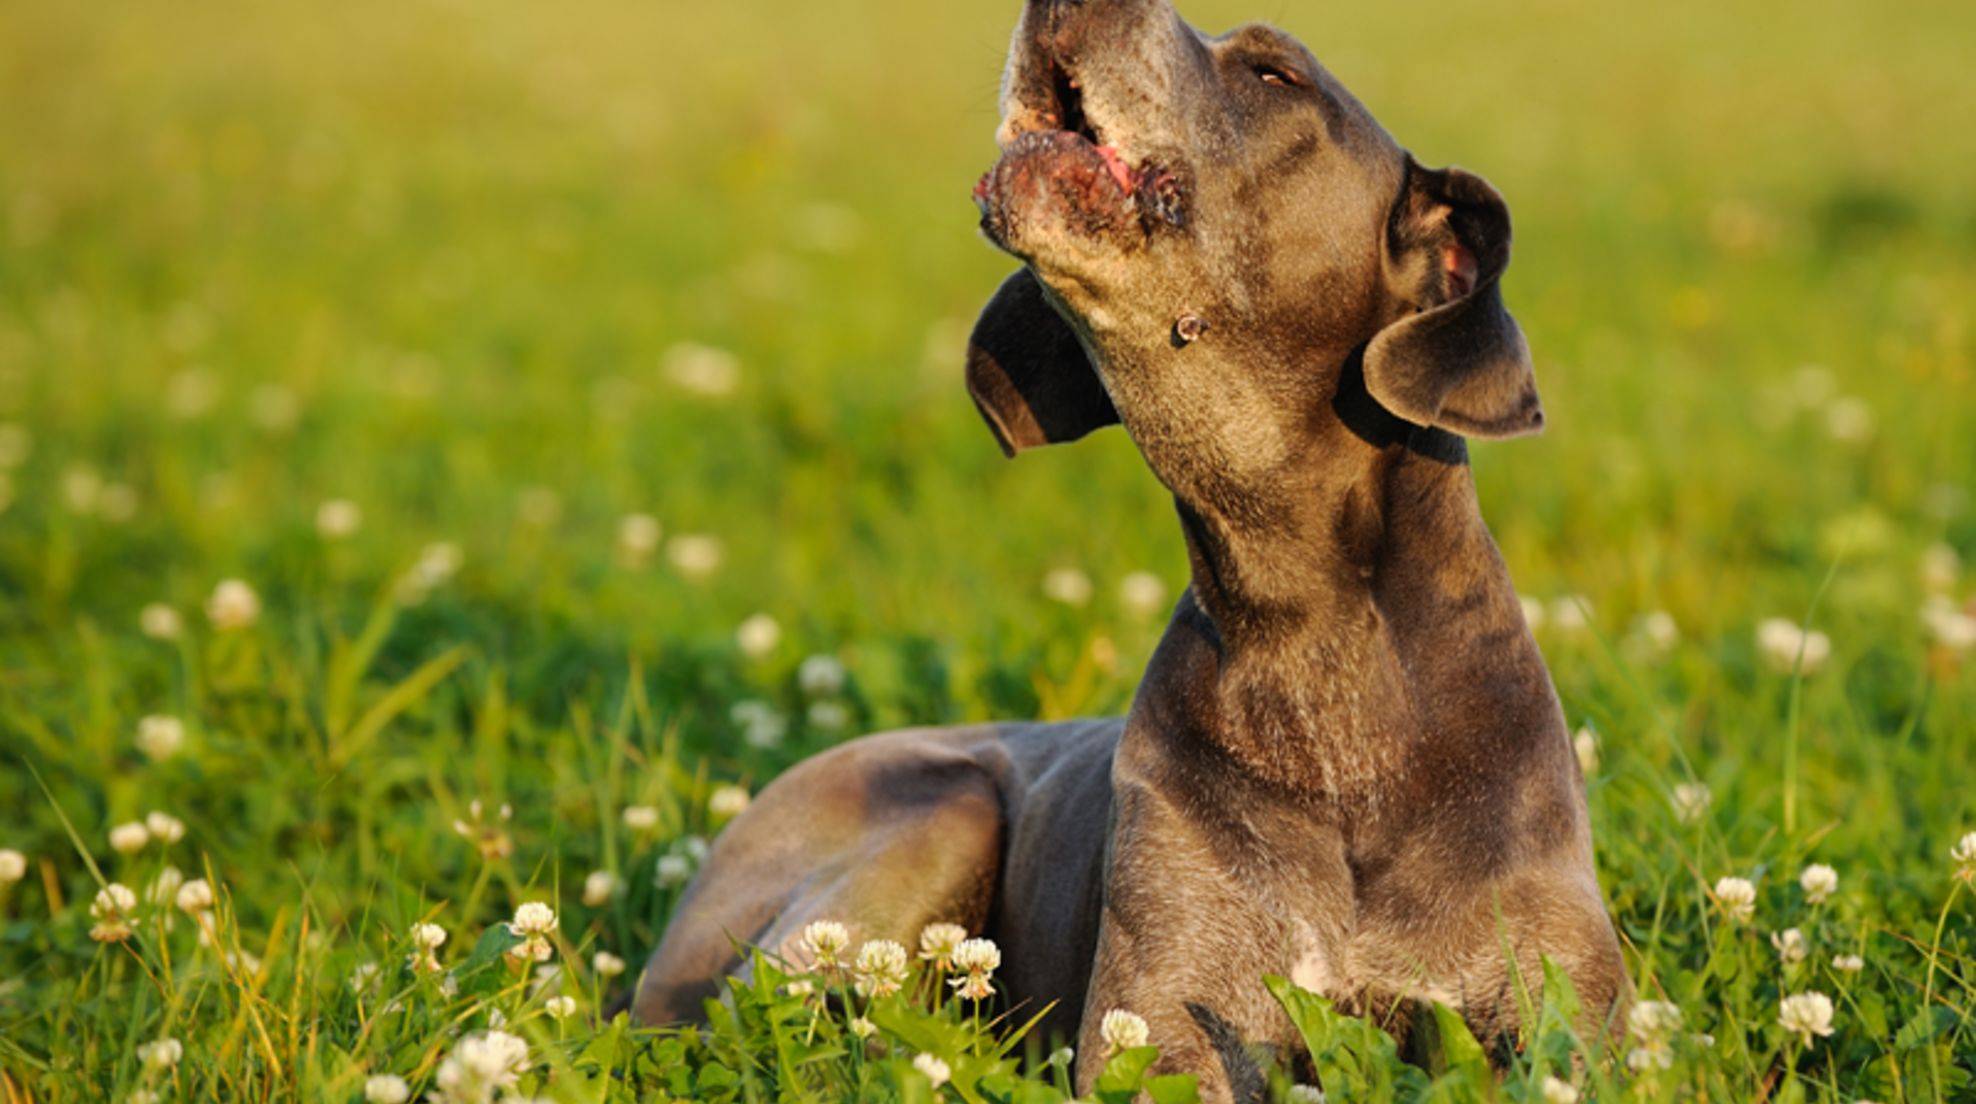 Wean your dog off whining: What to do with a whining four-legged friend?